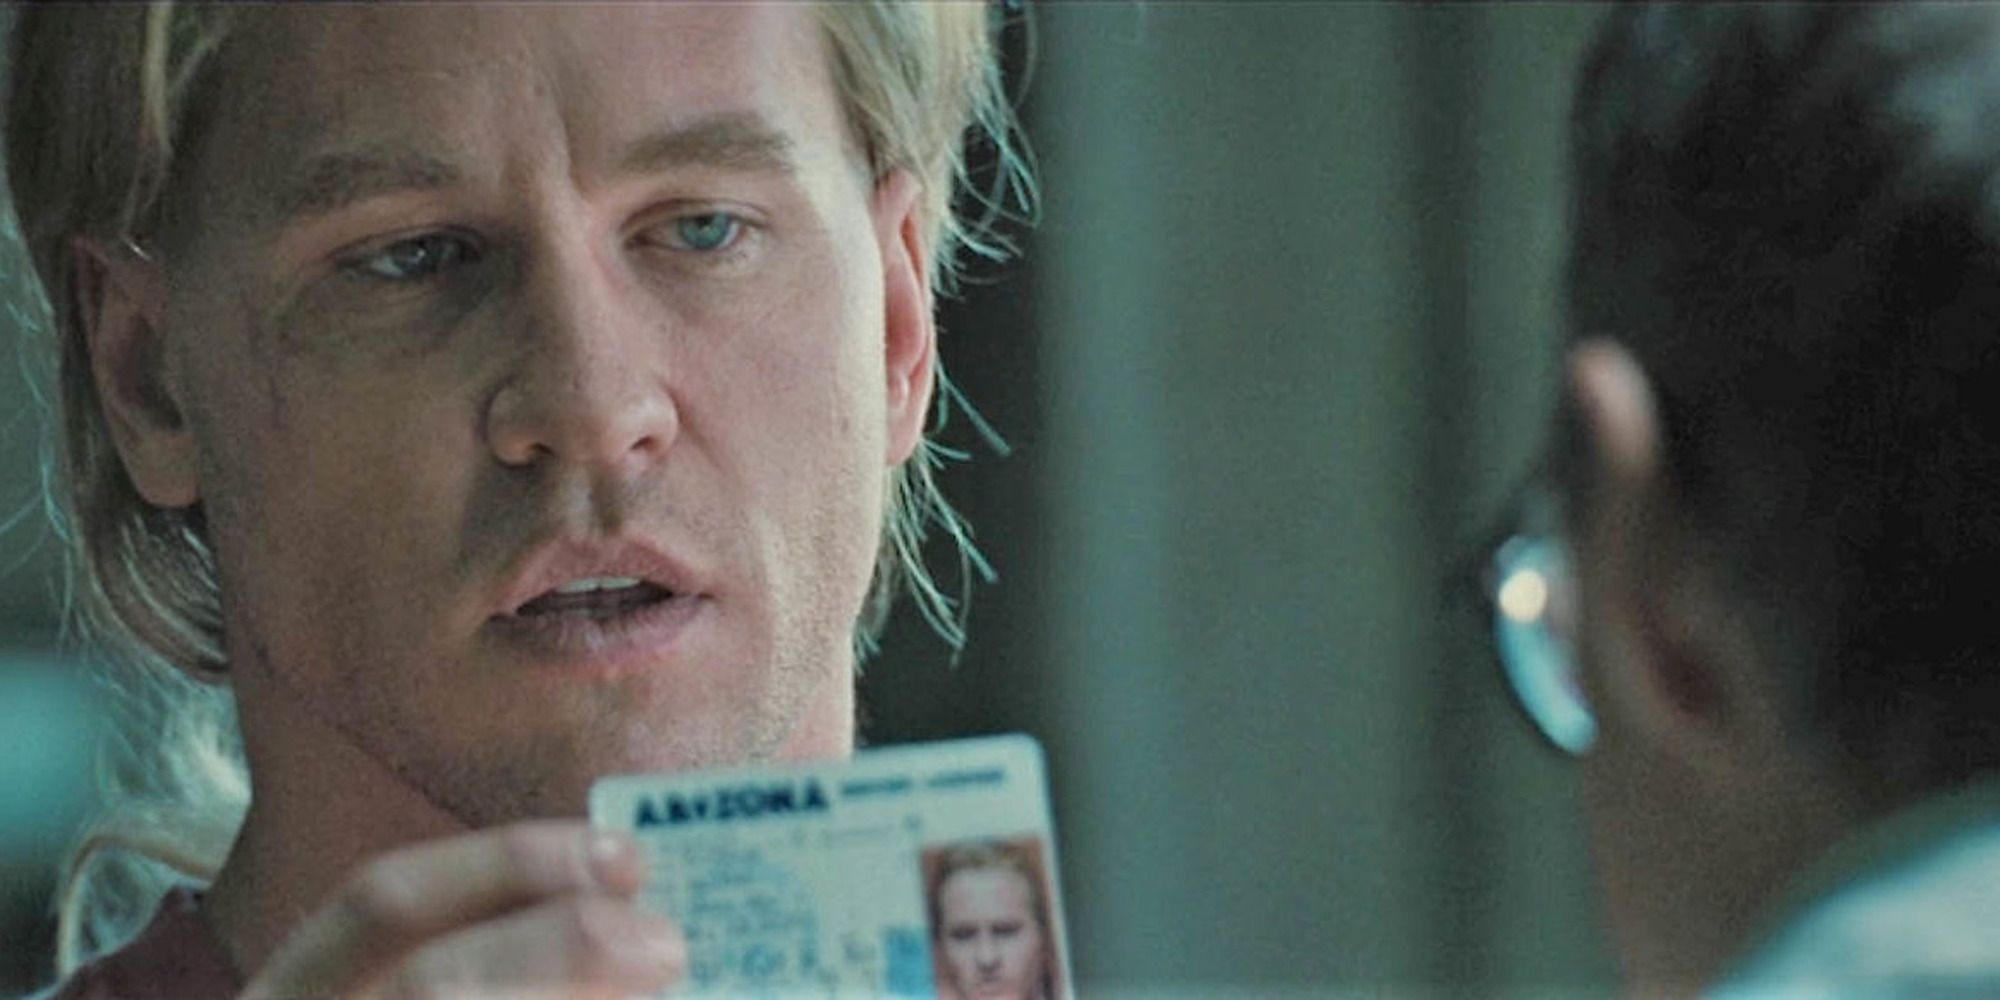 Val Kilmer in 'Heat' showing a man with glasses a piece of ID